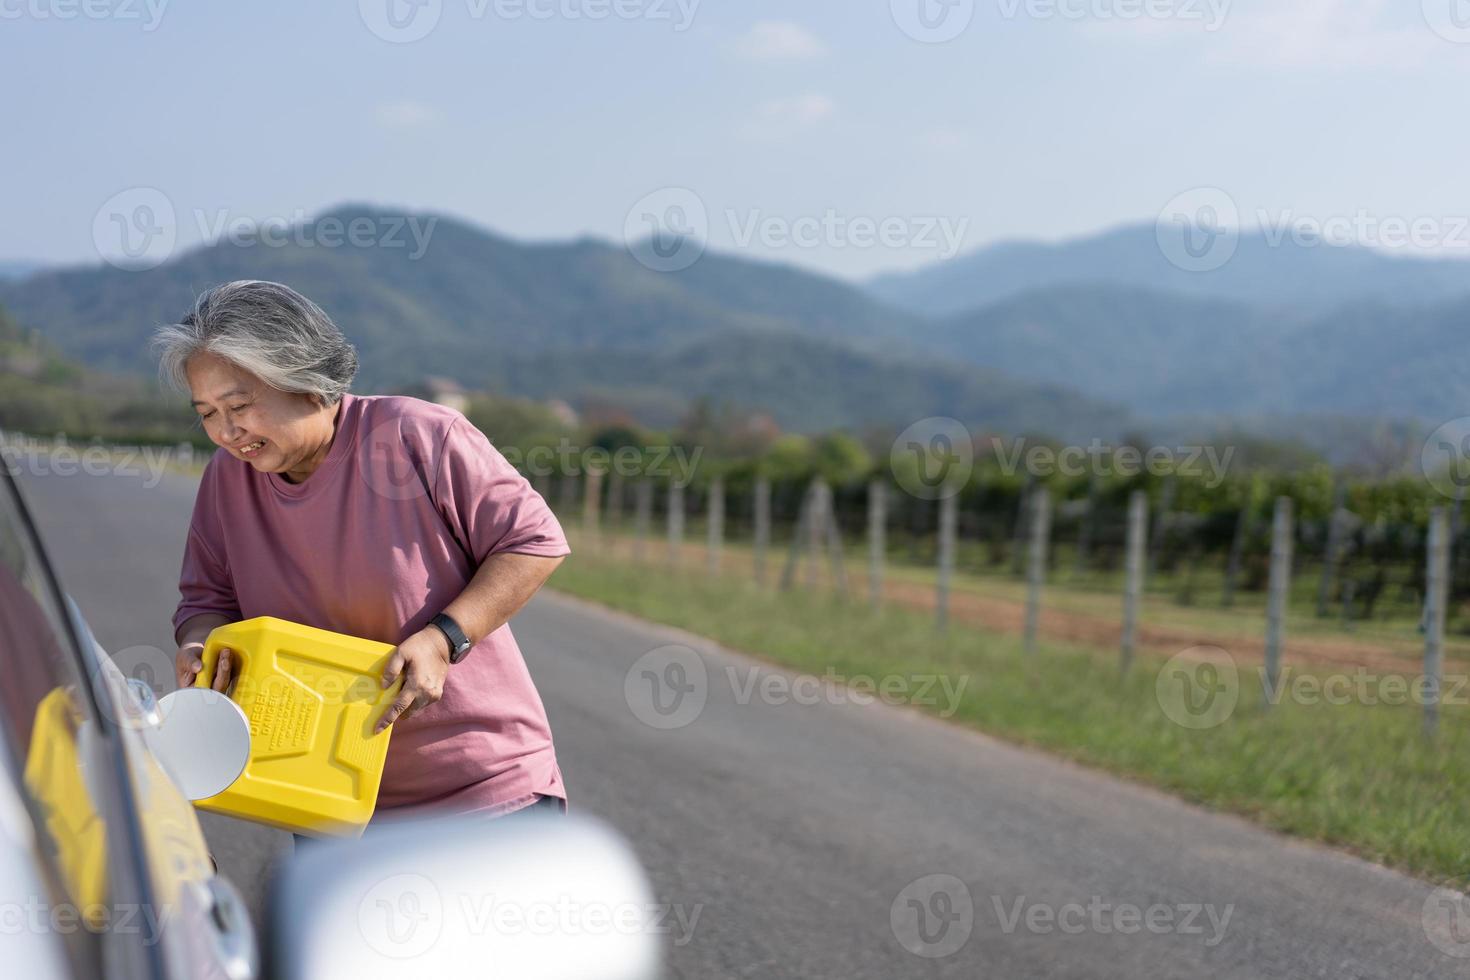 The car ran out of gas and stalled beside the road in suburbs and an elderly Asian woman used a gallon of spare gas to fuel the car. A woman prepares a gallon of spare gas to fuel before traveling. photo